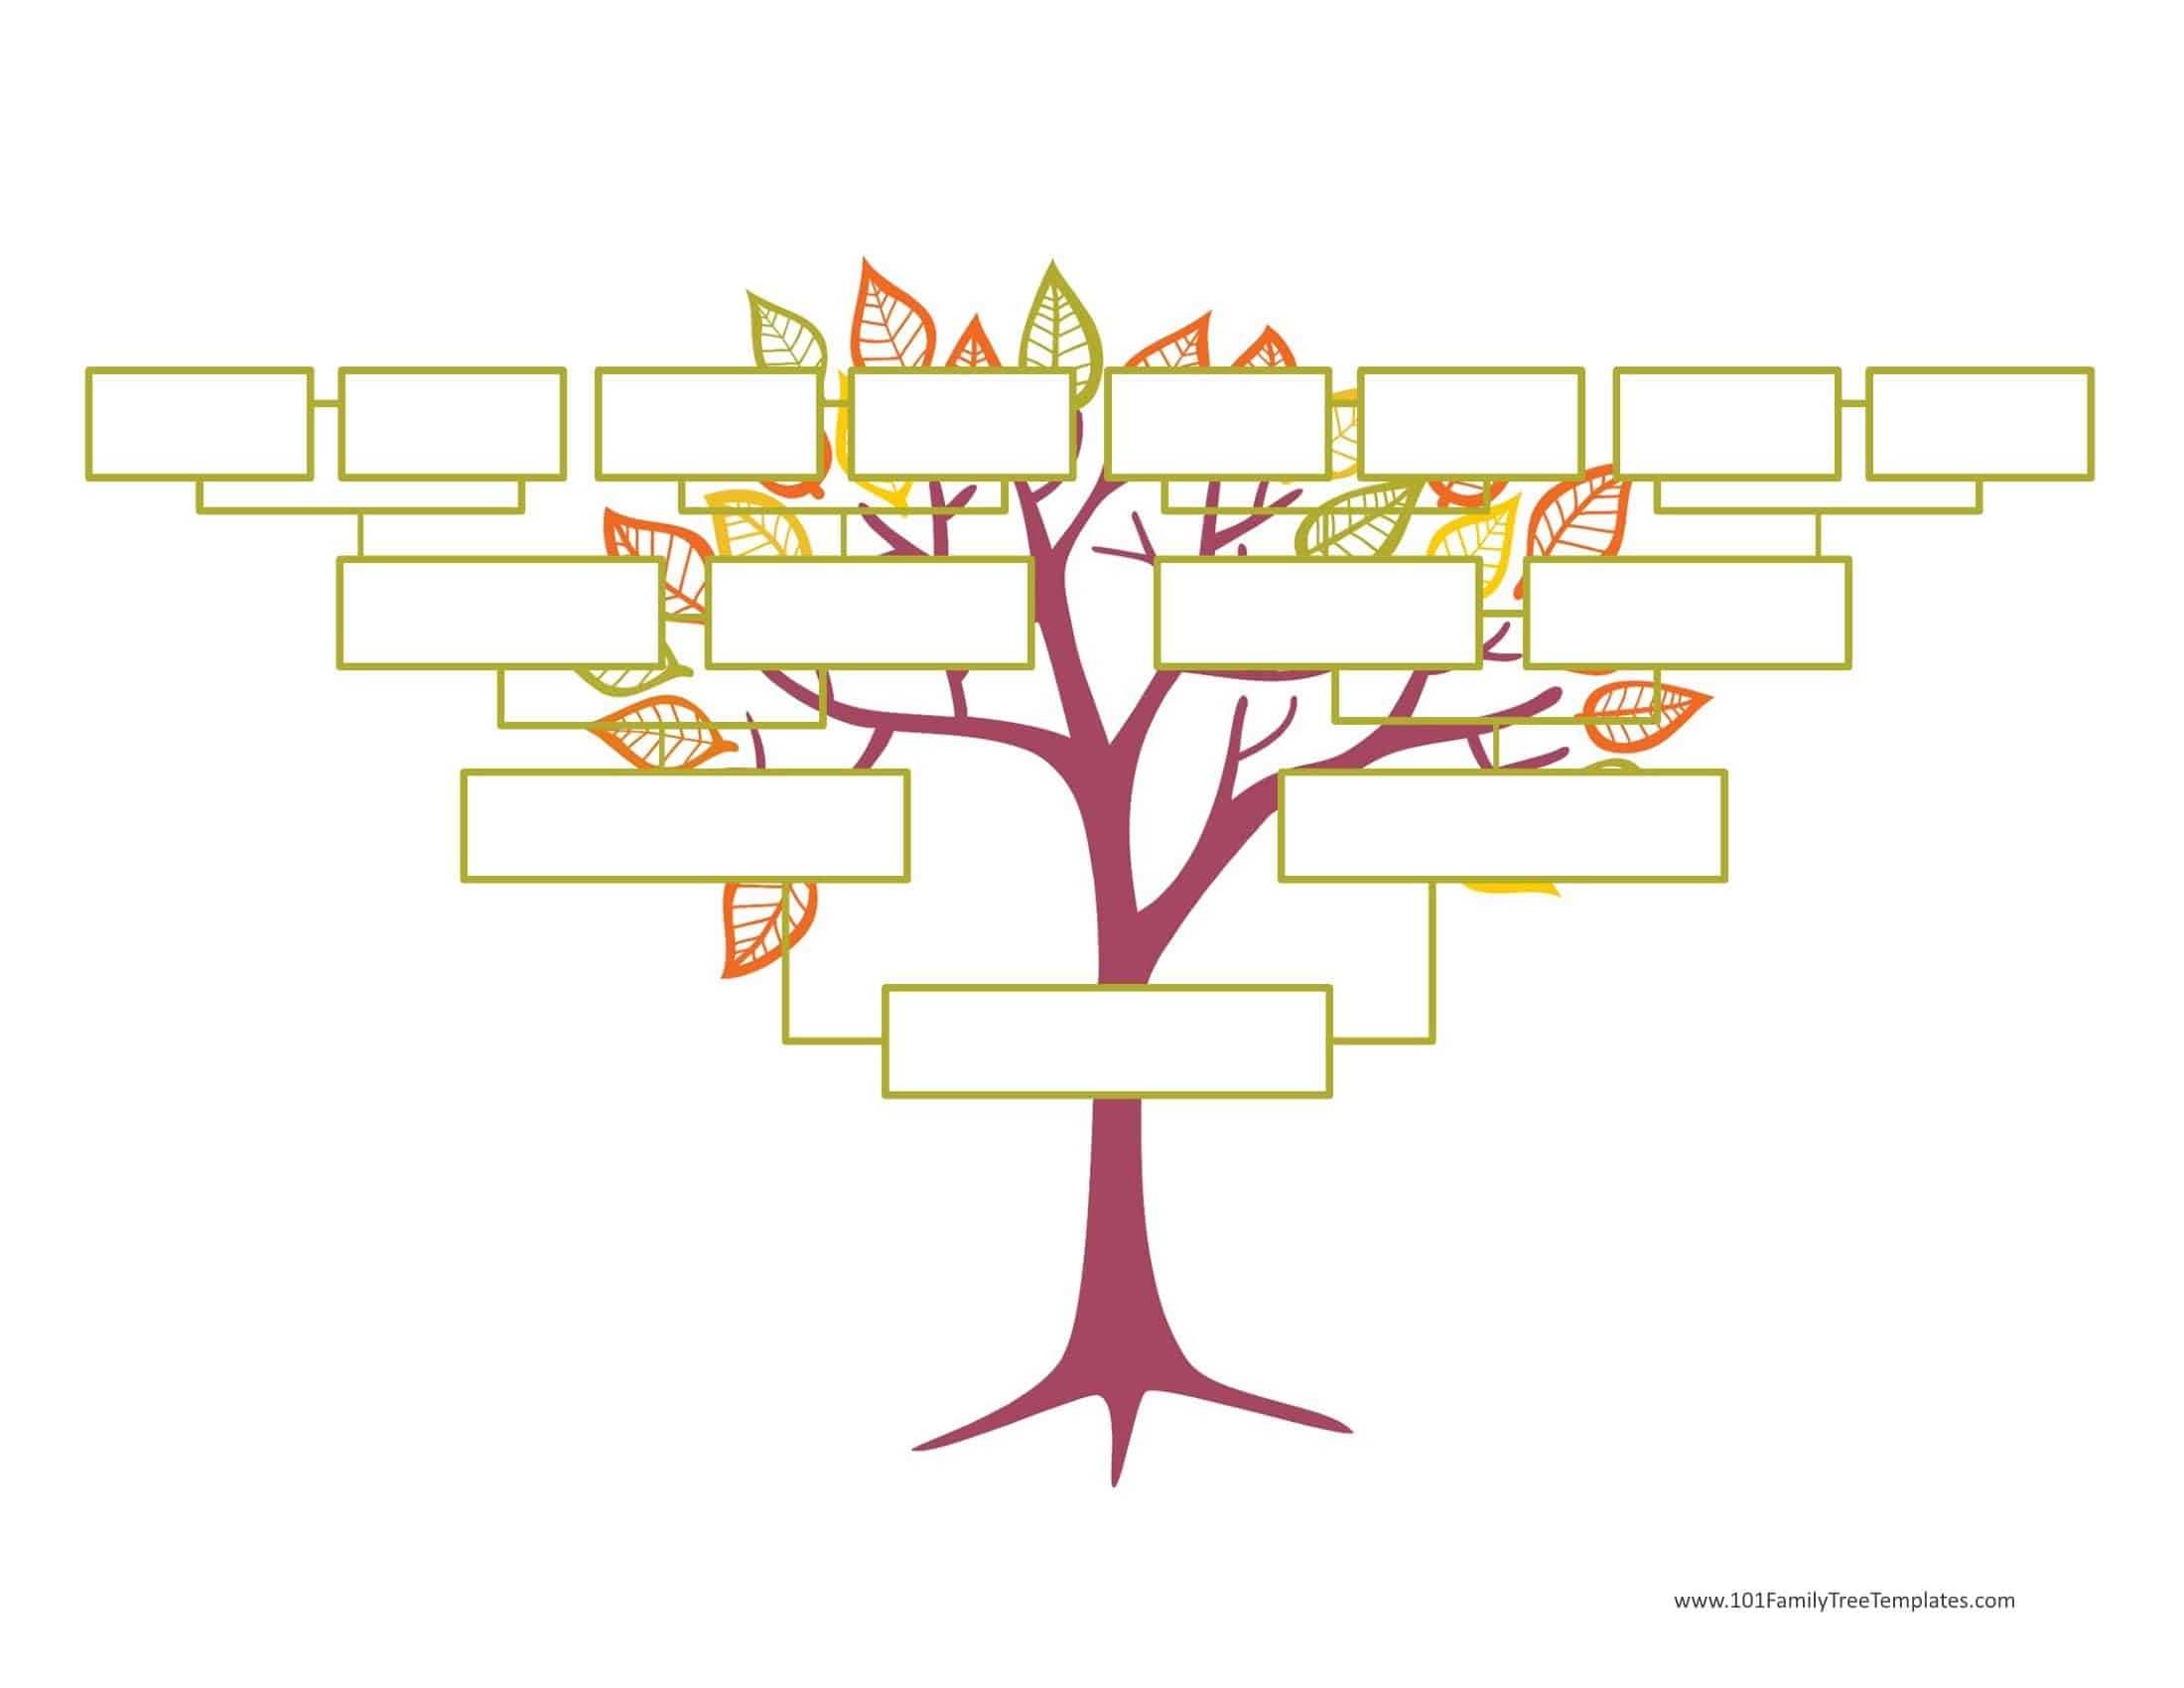 Blank Family Tree Template | Free Instant Download Throughout Blank Tree Diagram Template